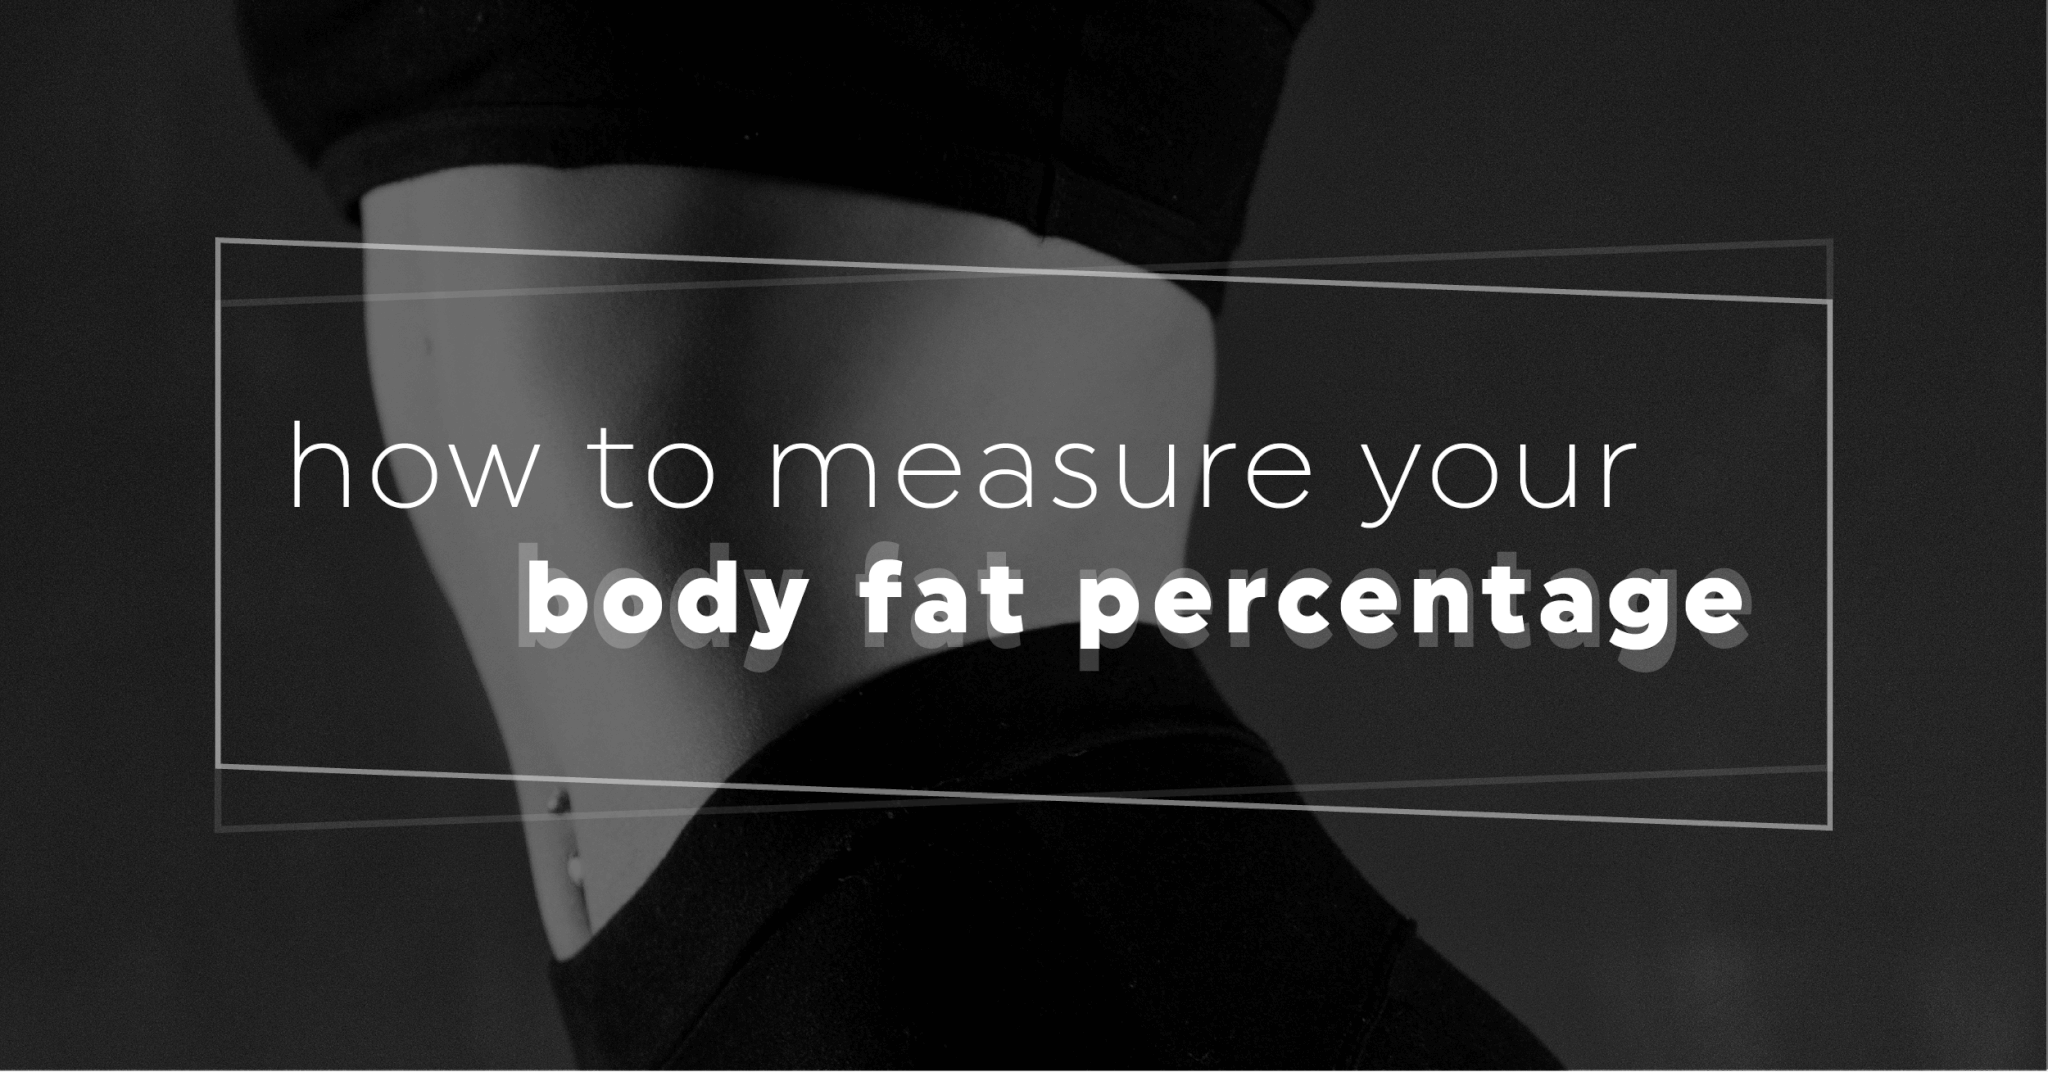 https://cdn.shpe.us/wp-content/uploads/sites/5/2019/01/how-to-measure-your-body-fat-percentage.-3-01.png